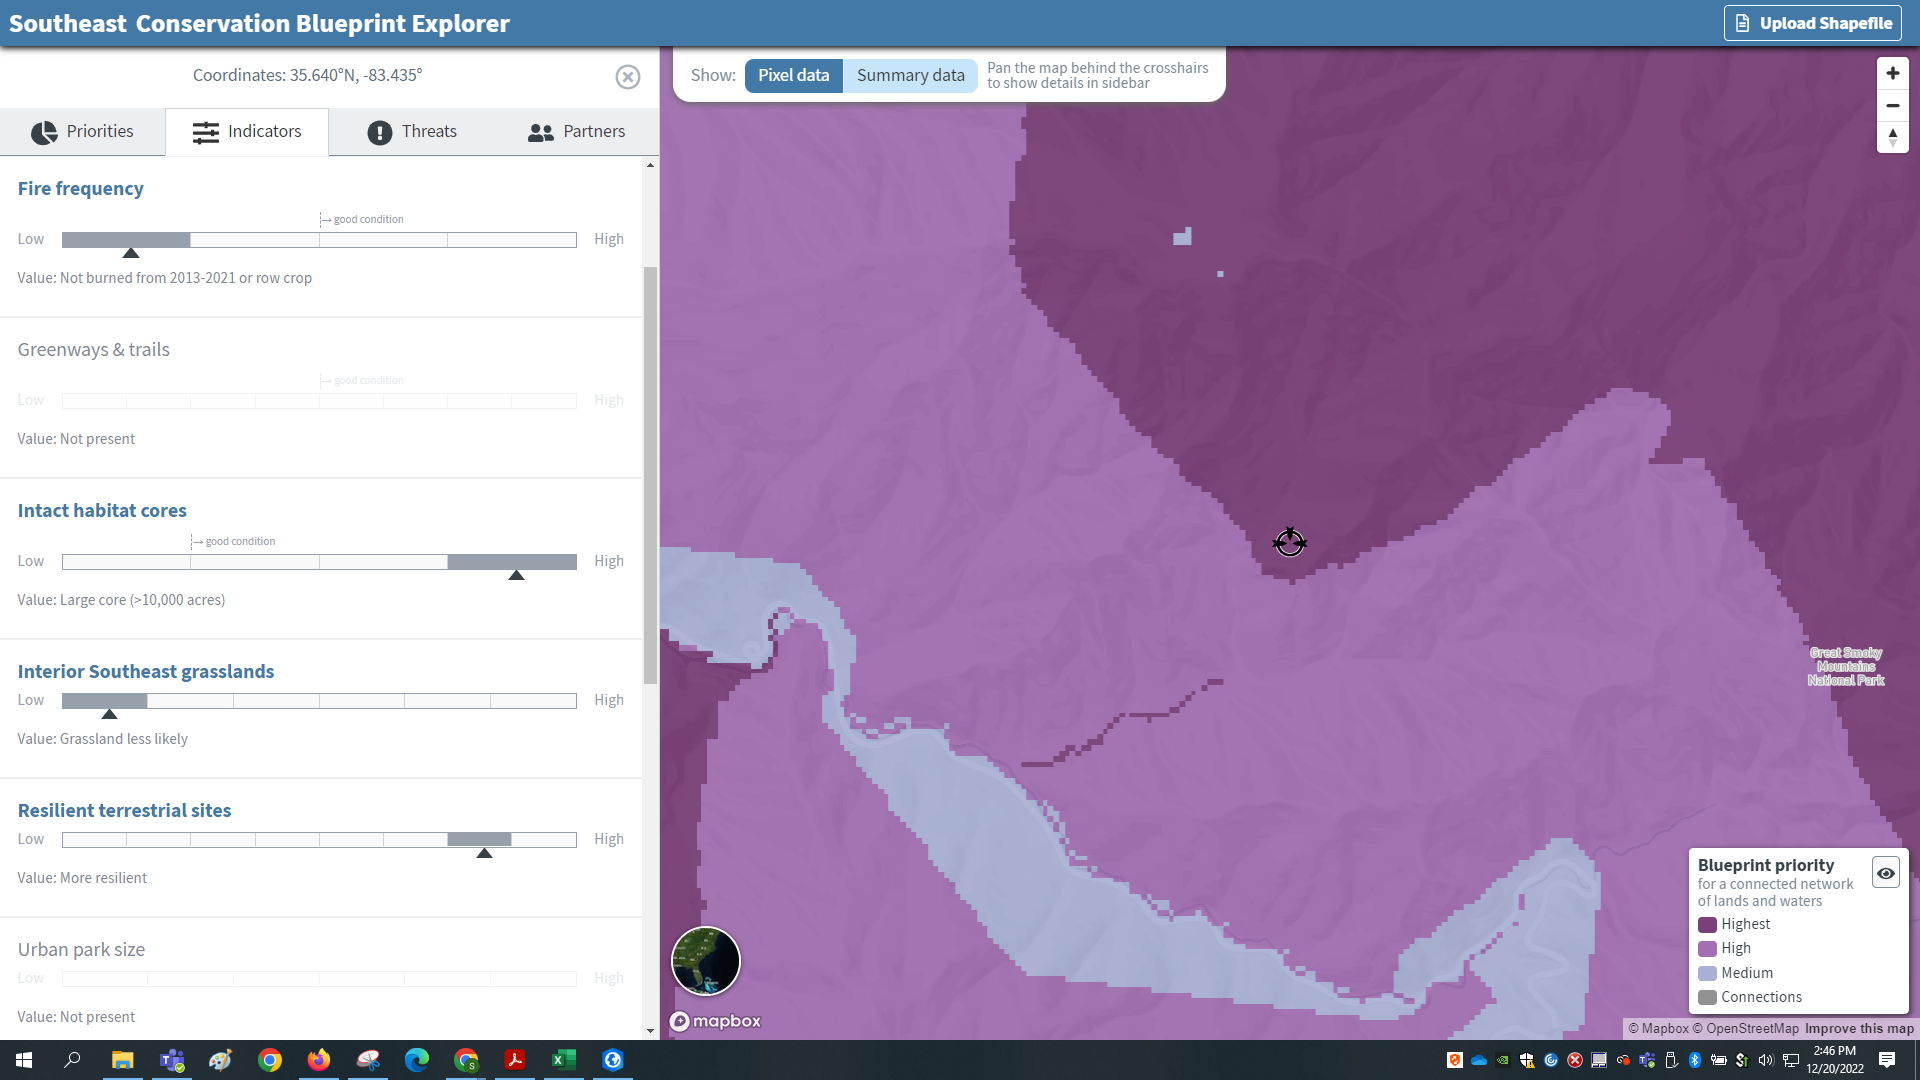 Screenshot of the Blueprint Explorer viewer in pixel mode, showing a zoomed in map in shades of purple and a sidebar of indicator information.